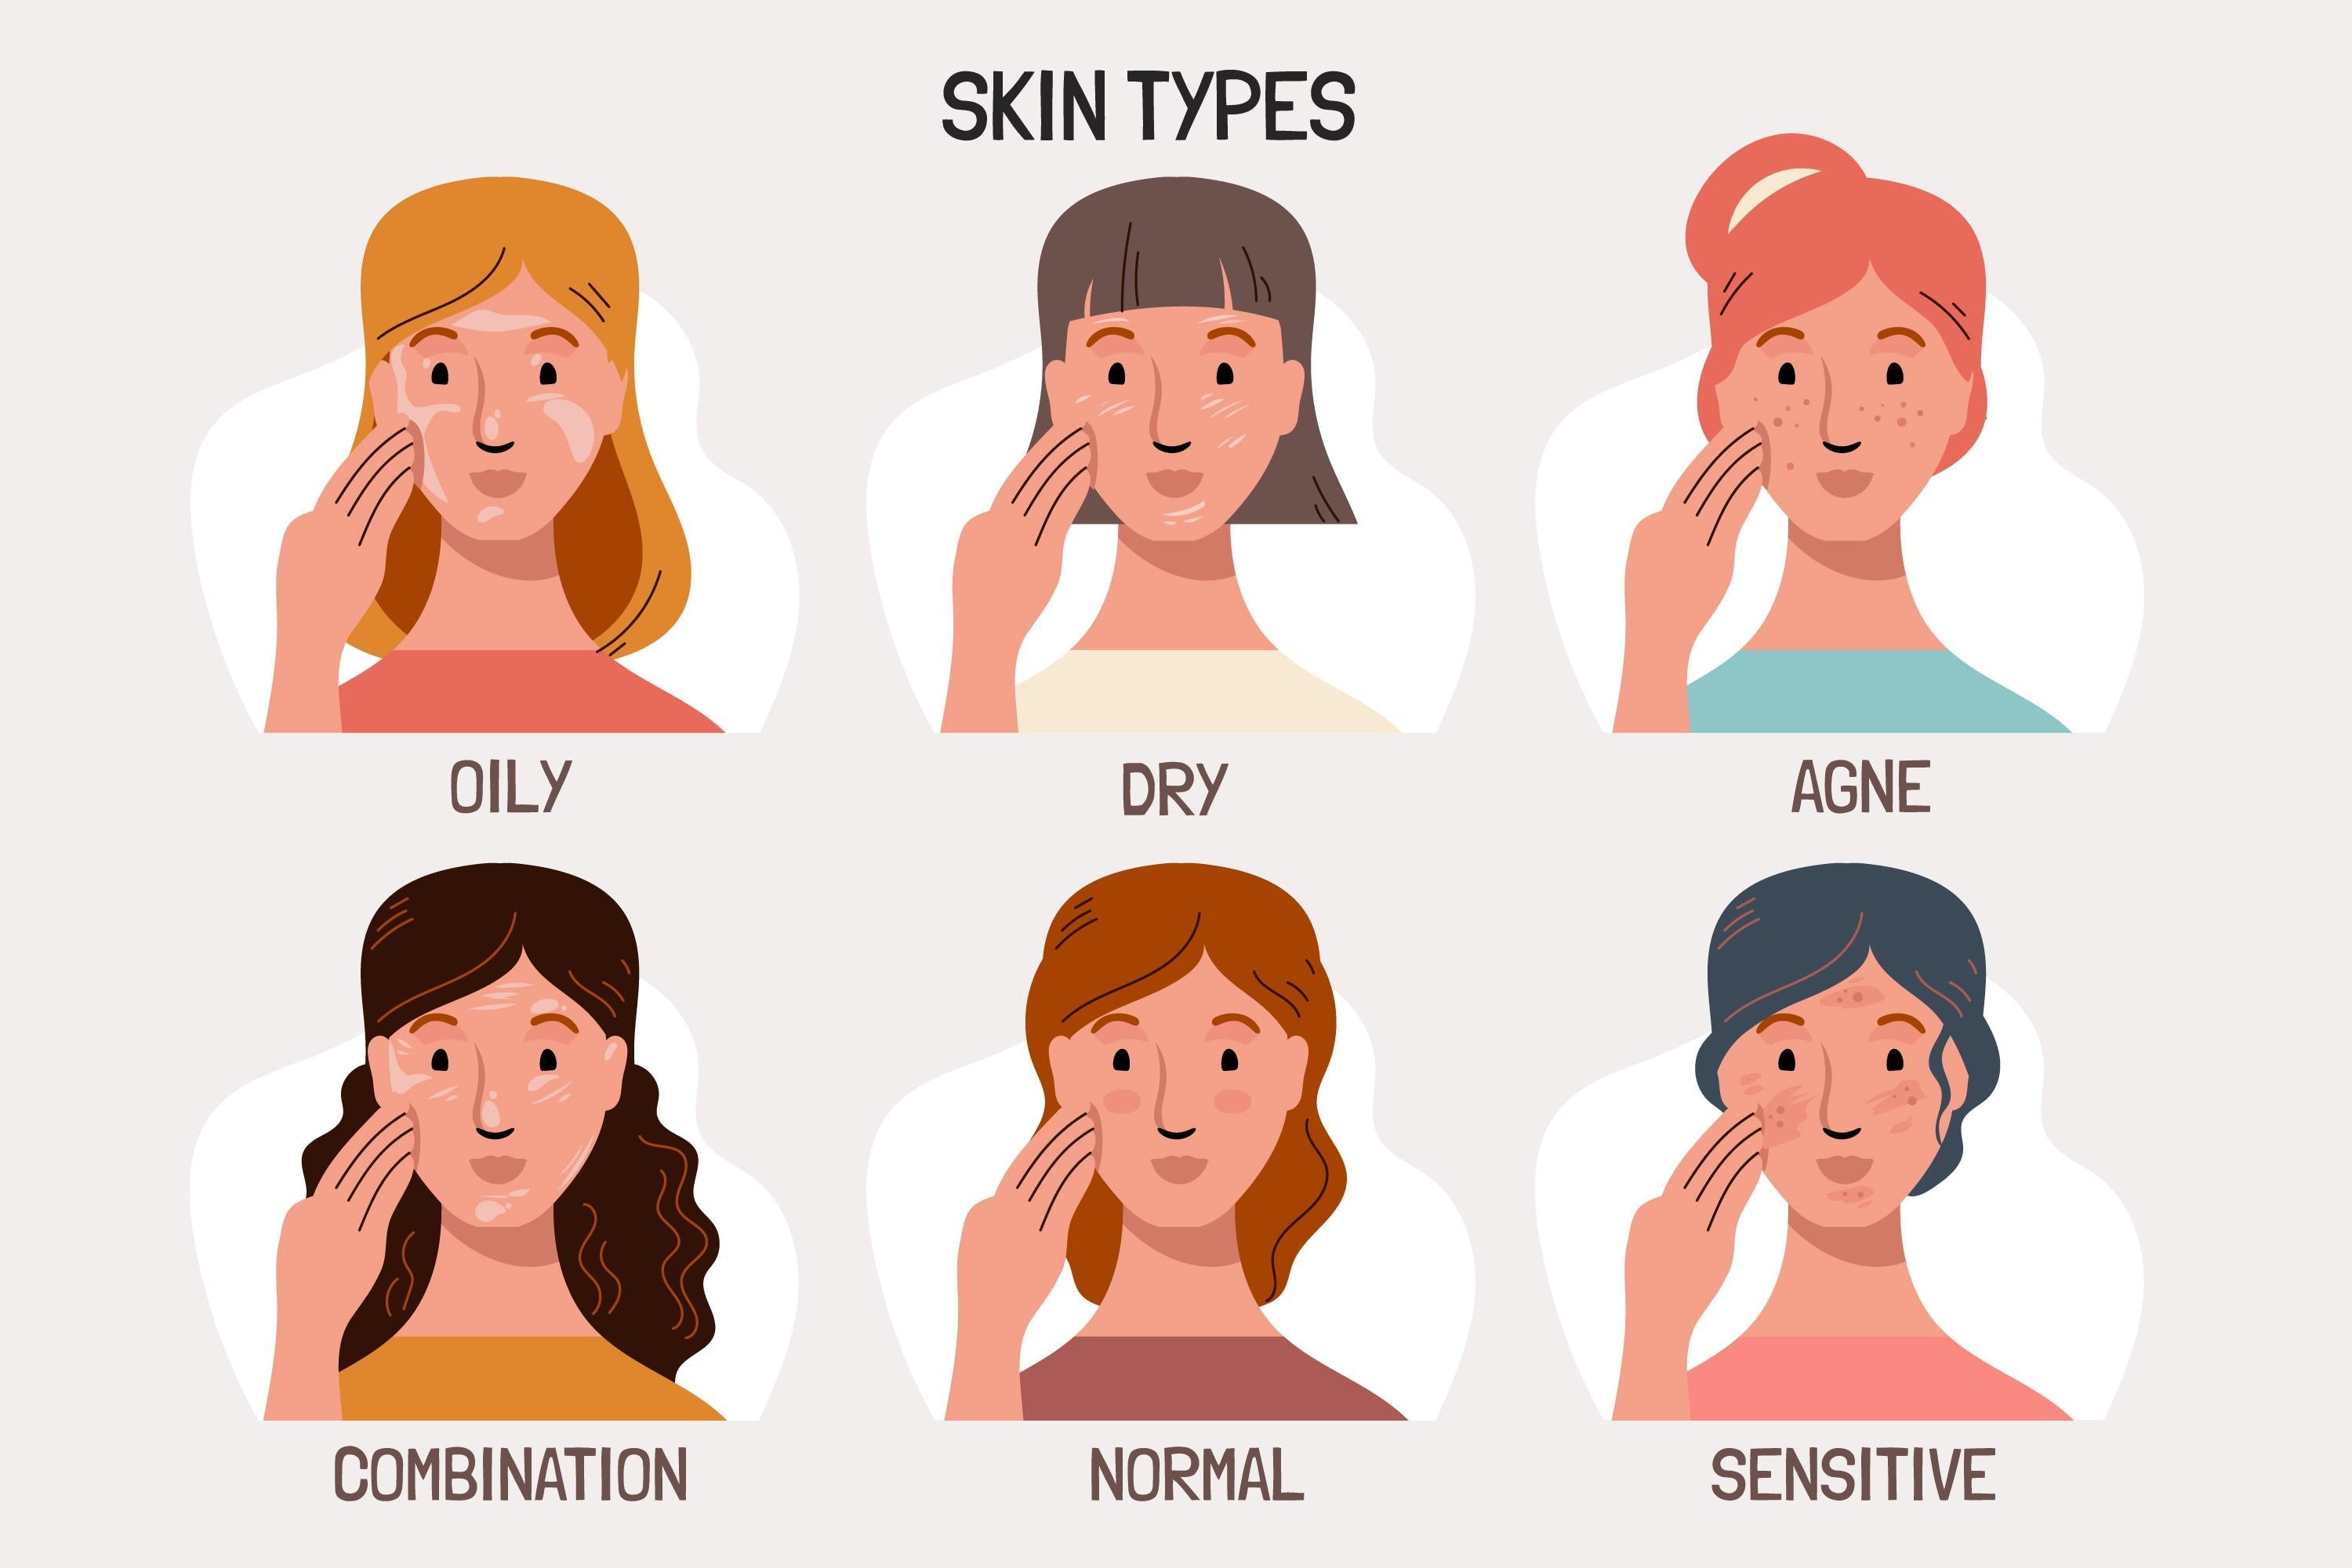 How Do Oily, Normal, Dry, Sensitive, and Combination Skin Types Differ?